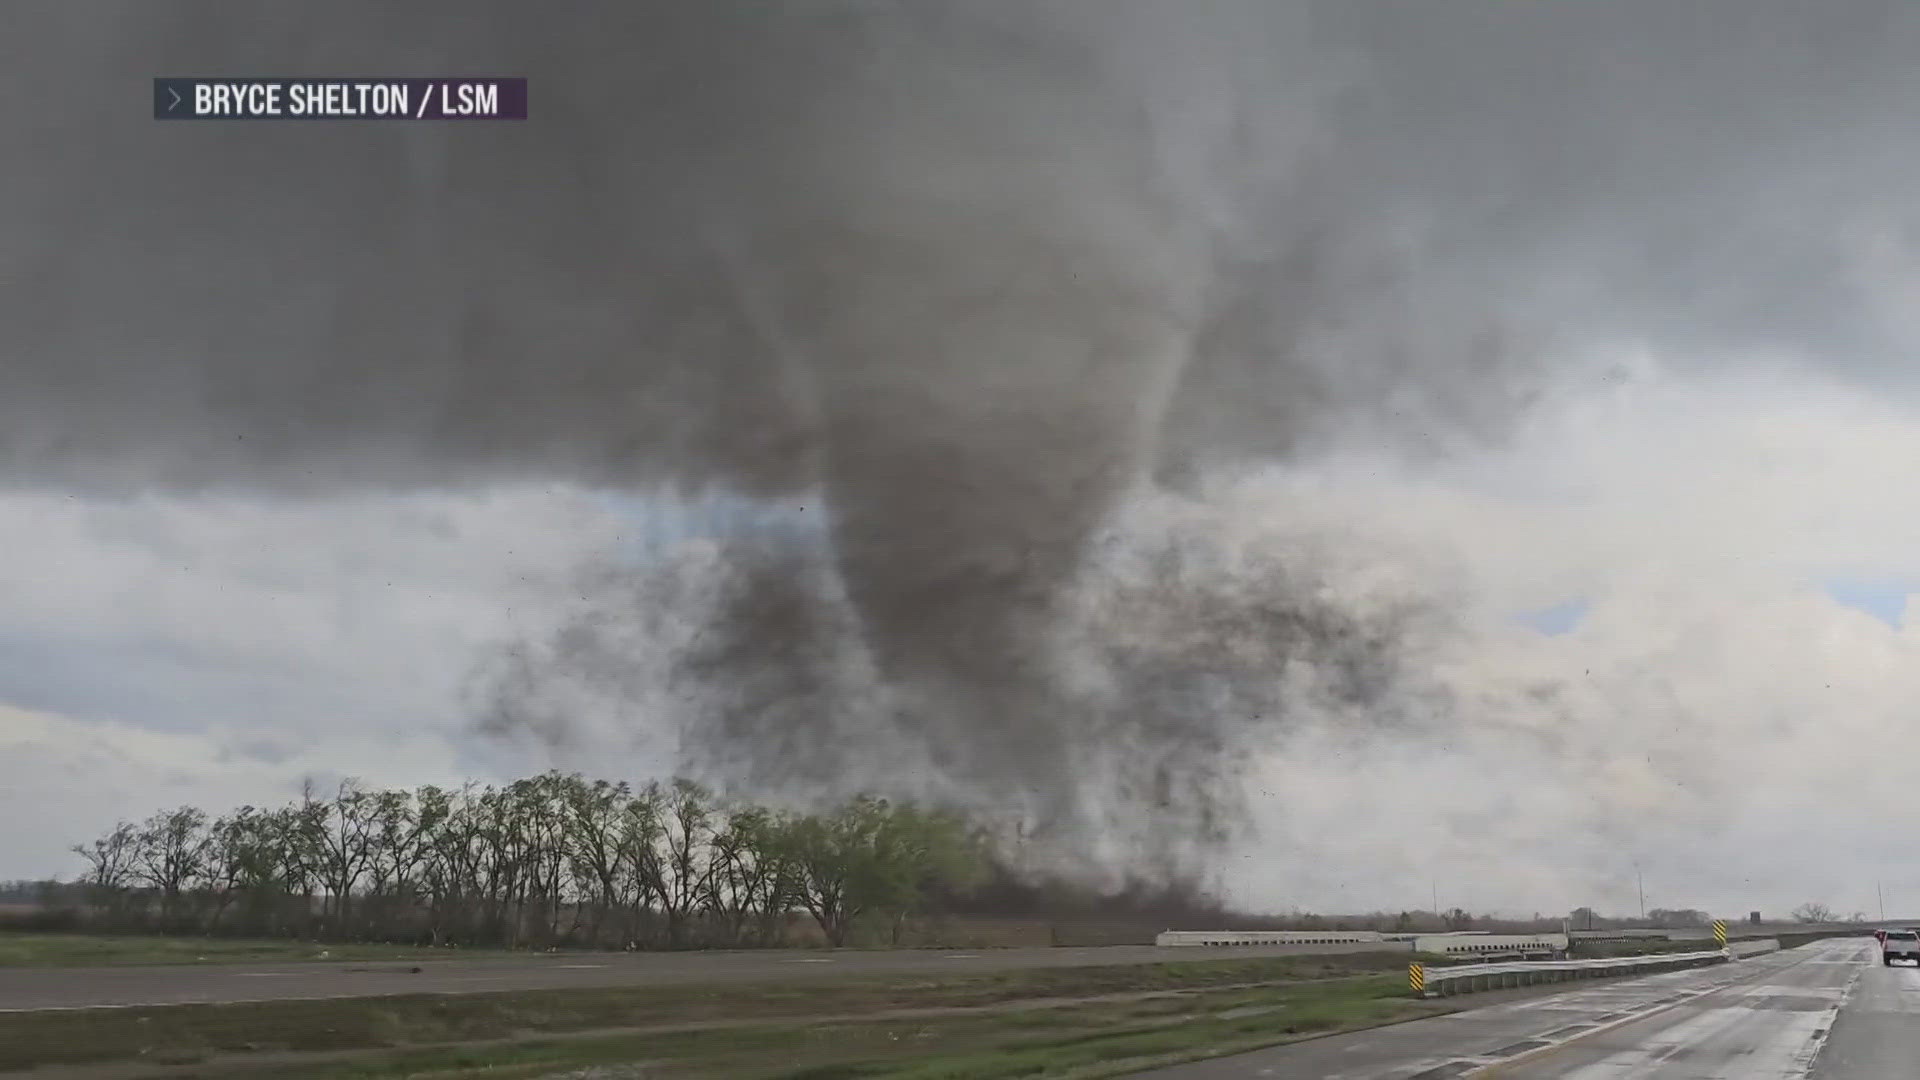 There were over a dozen tornadoes reported across Nebraska.